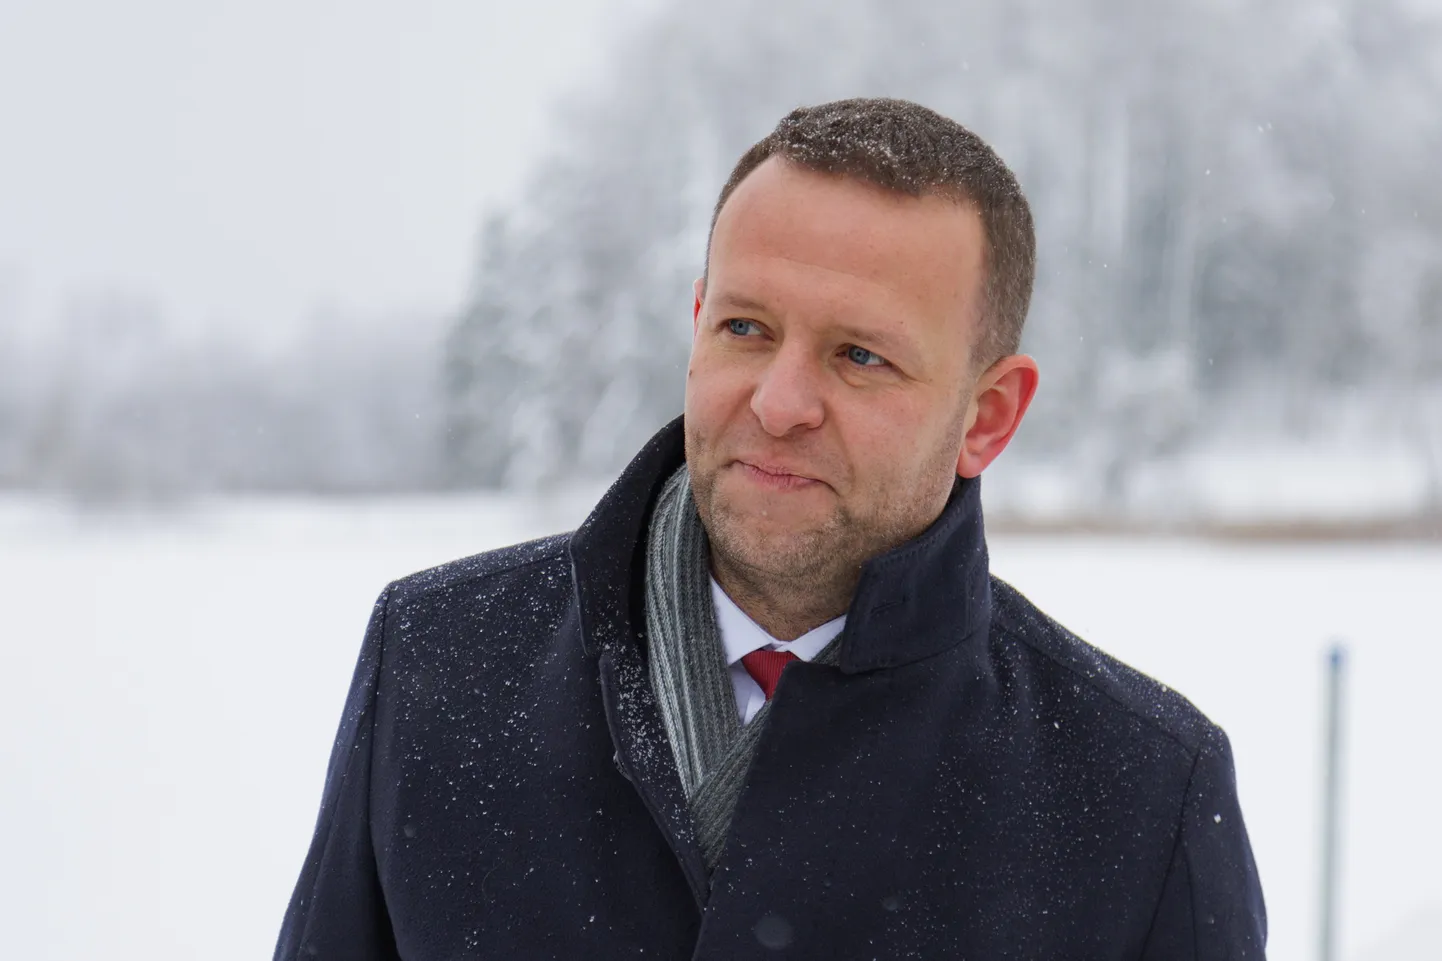 Estonia has no plans to start sending back draft-age Ukrainian men without an official request from Ukrainian authorities, according to Estonian Minister of the Interior Lauri Laanemets.